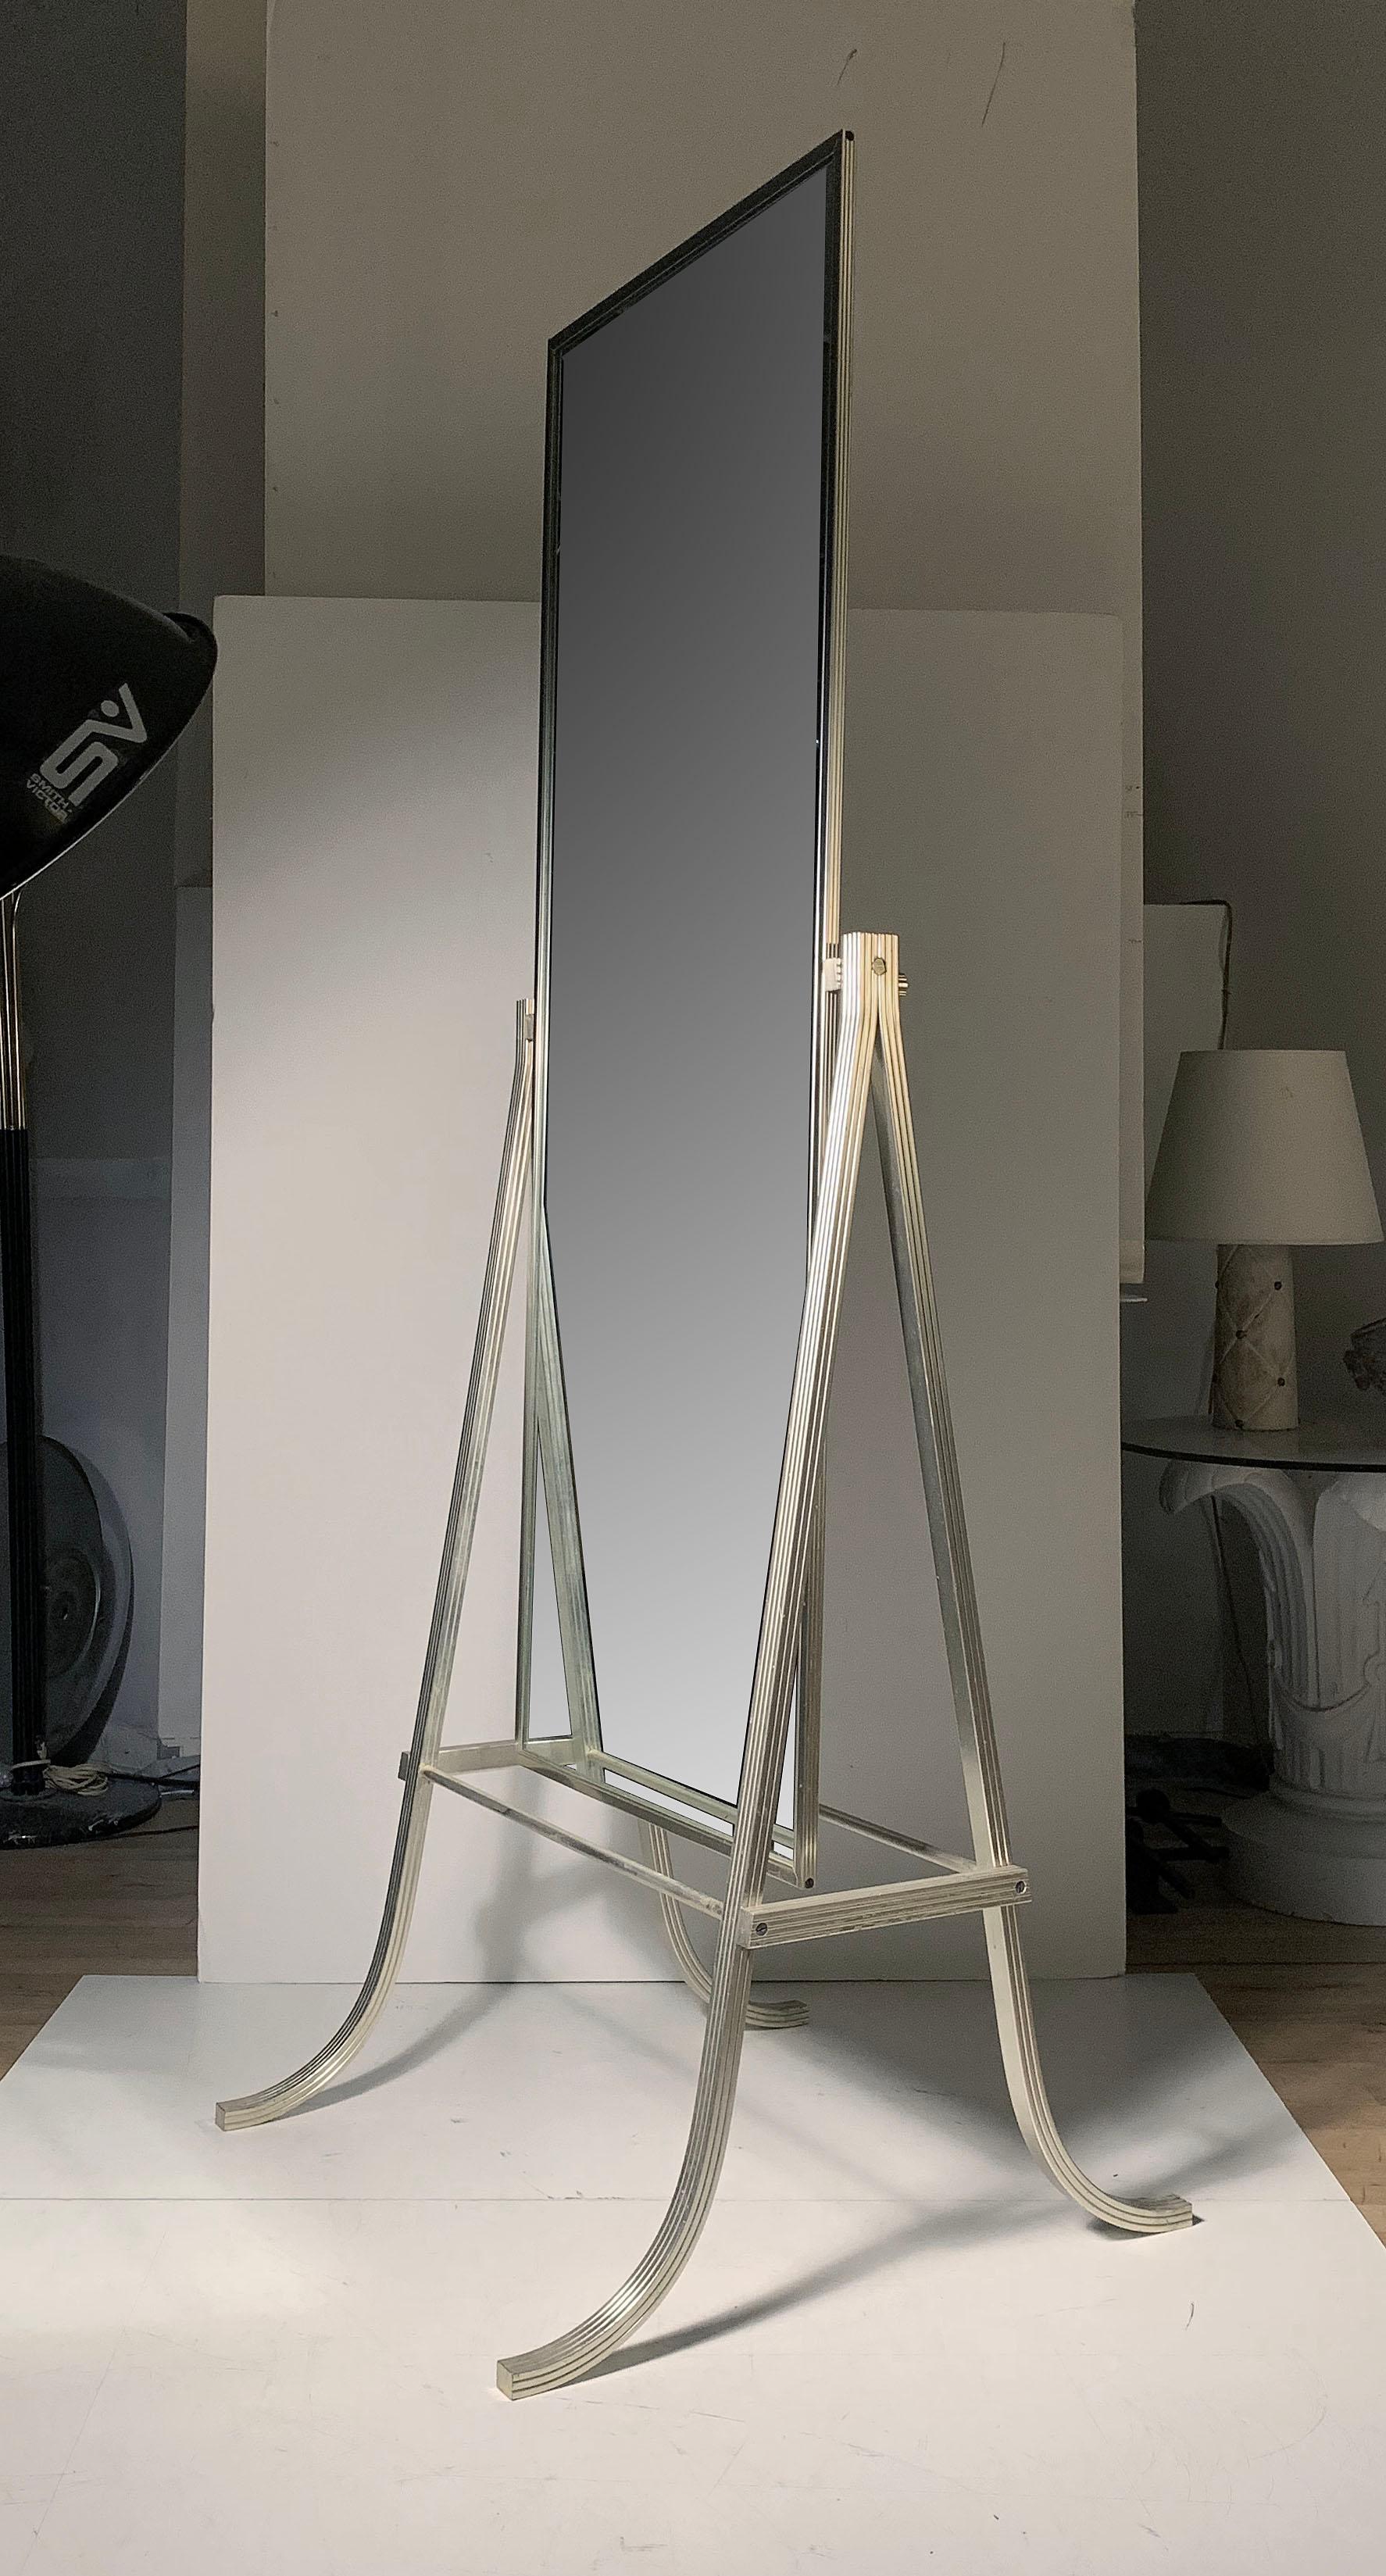 Unusual Vintage mid-20th century industrial modern designer dressing mirror.

In the manner of Milo Baughman & Tommi Parzinger

The actual mirror dimensions are 20 5/8